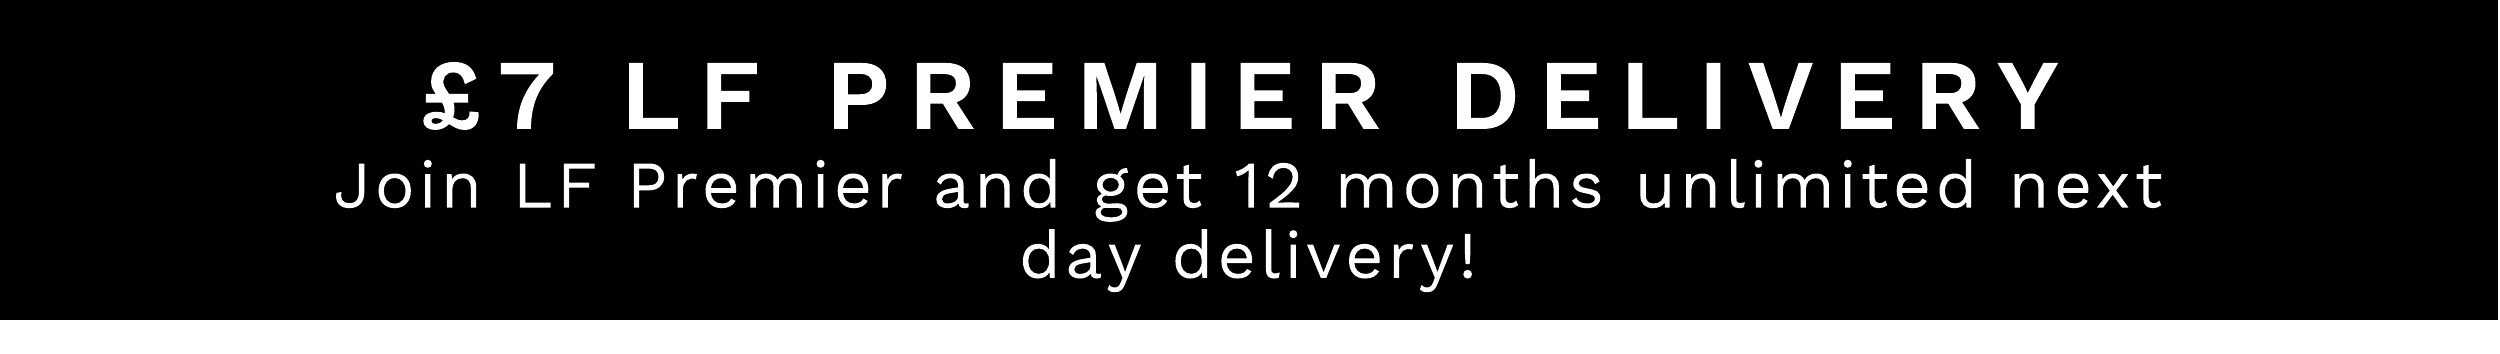 7 LF PREMIER DELIVERY Join LF Premier and get 12 months unlimited next day delivery! 